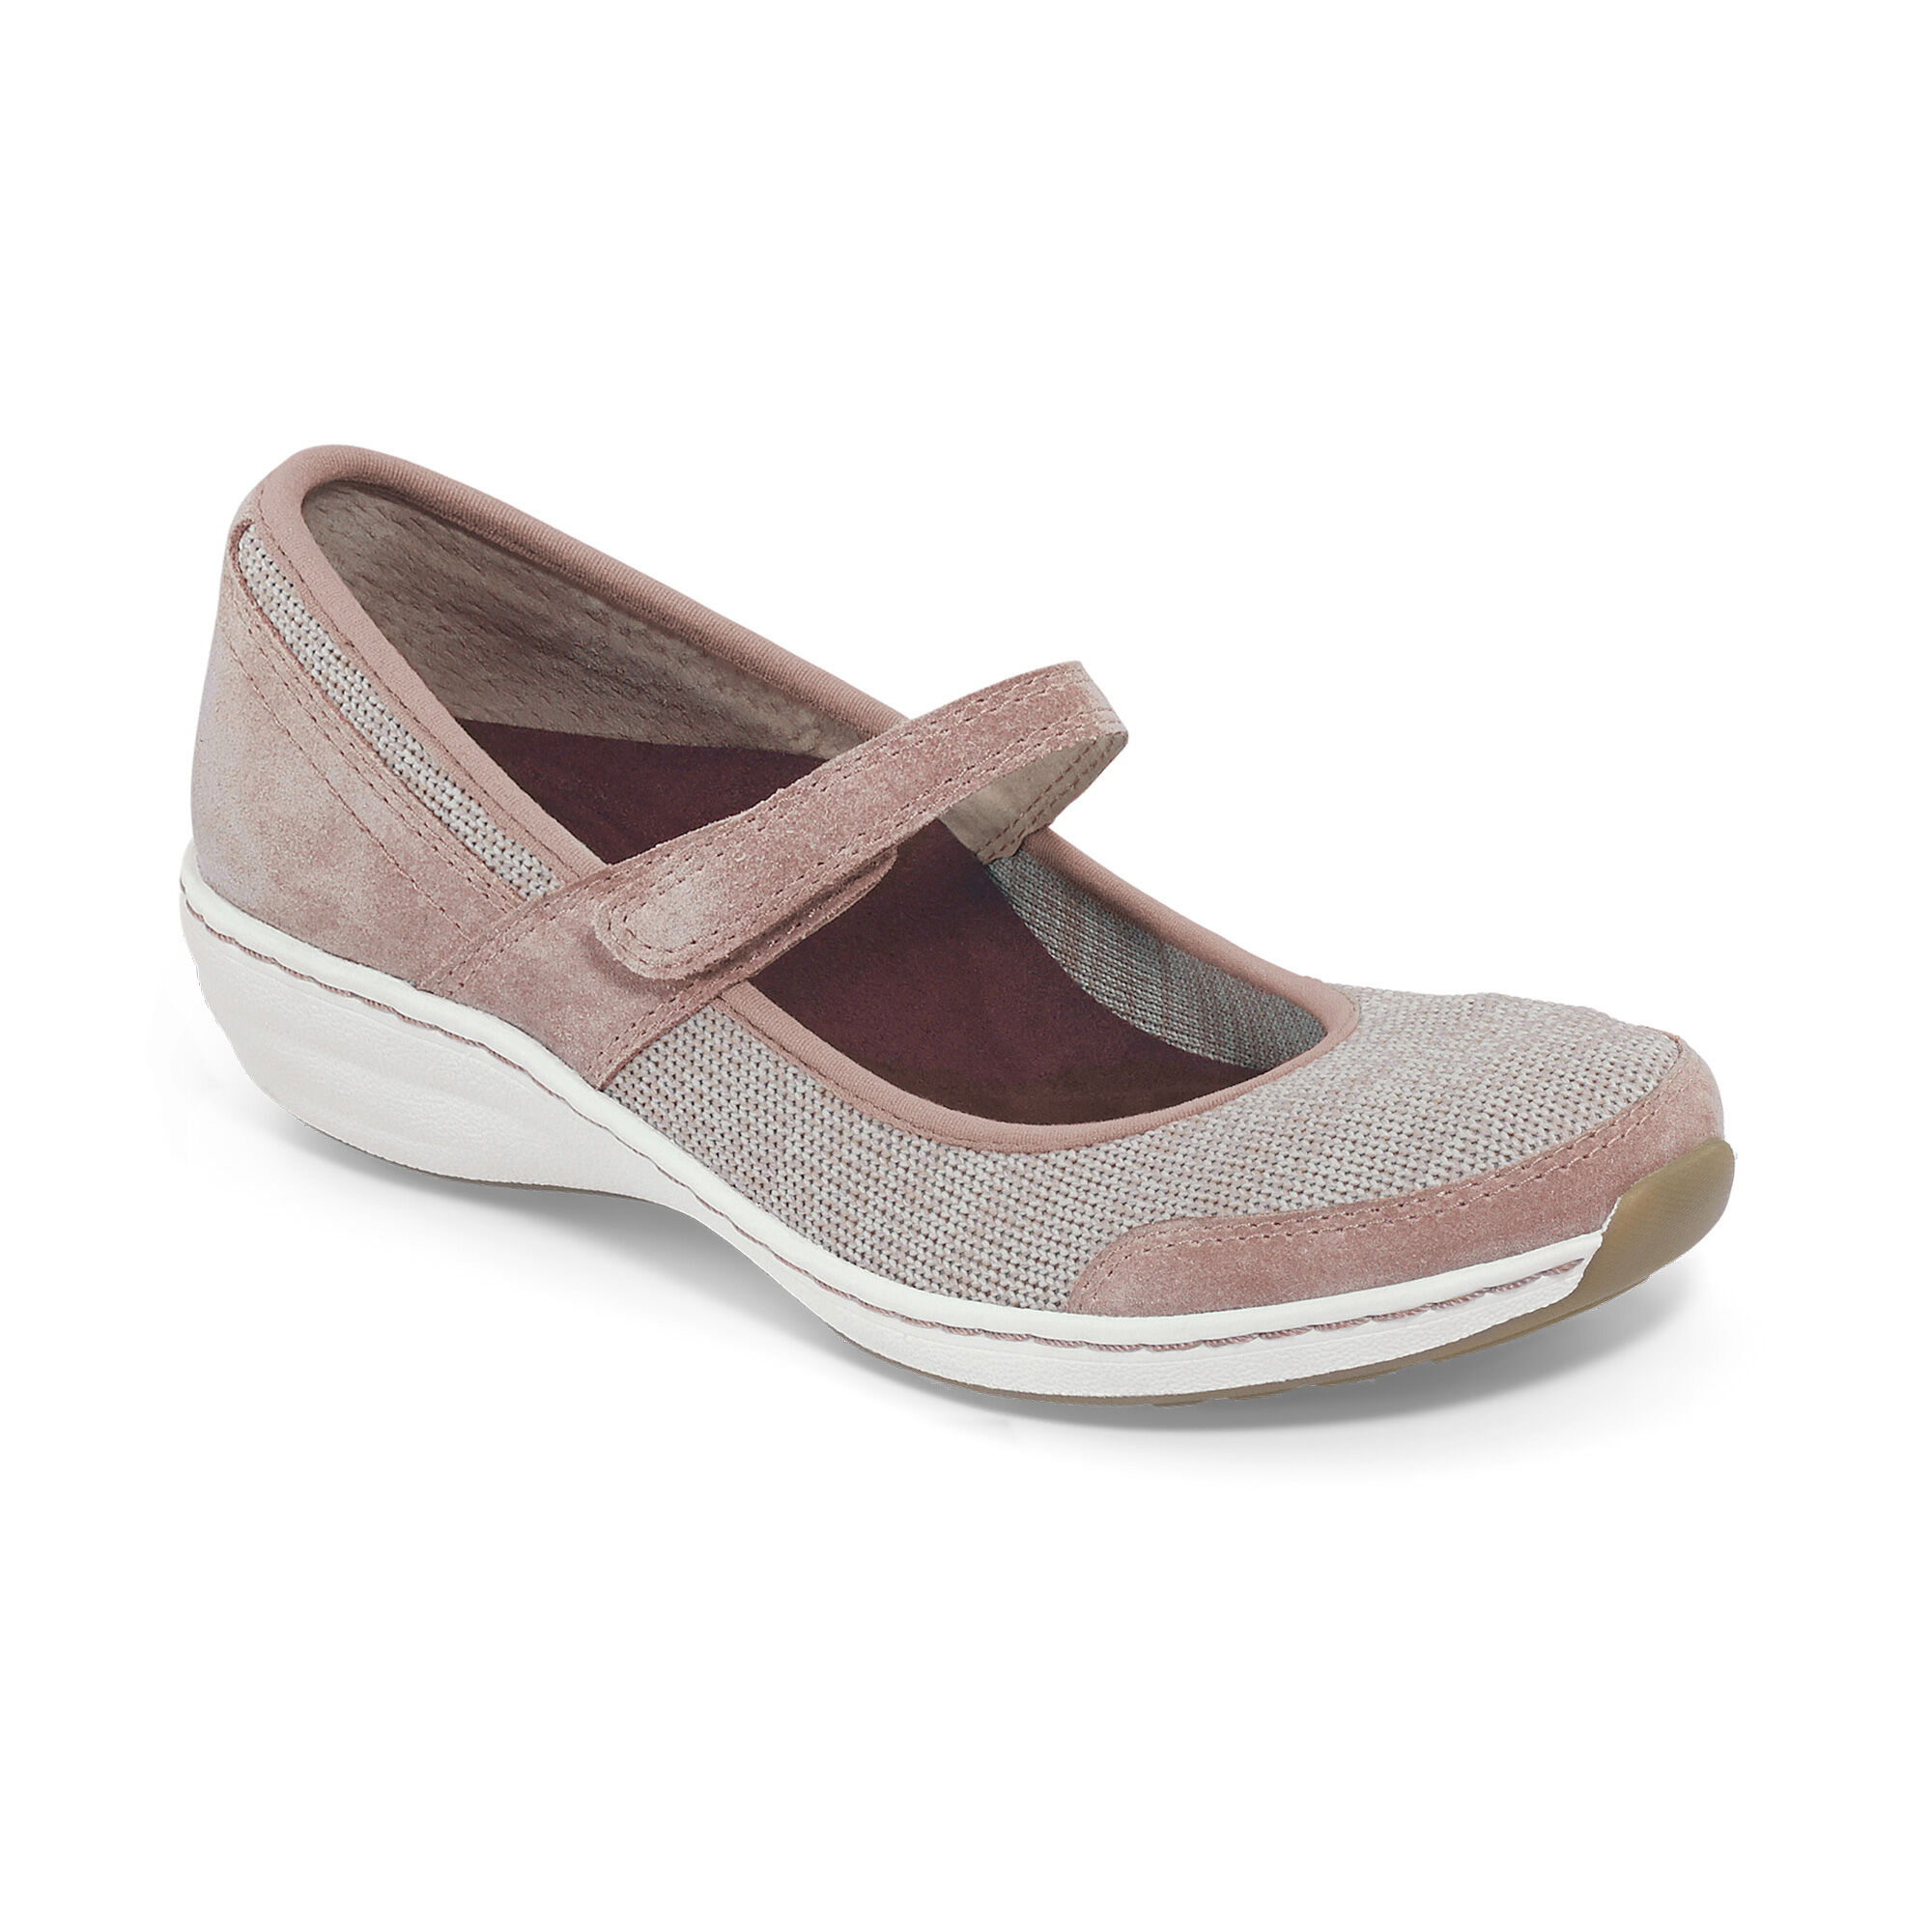 mary janes with arch support